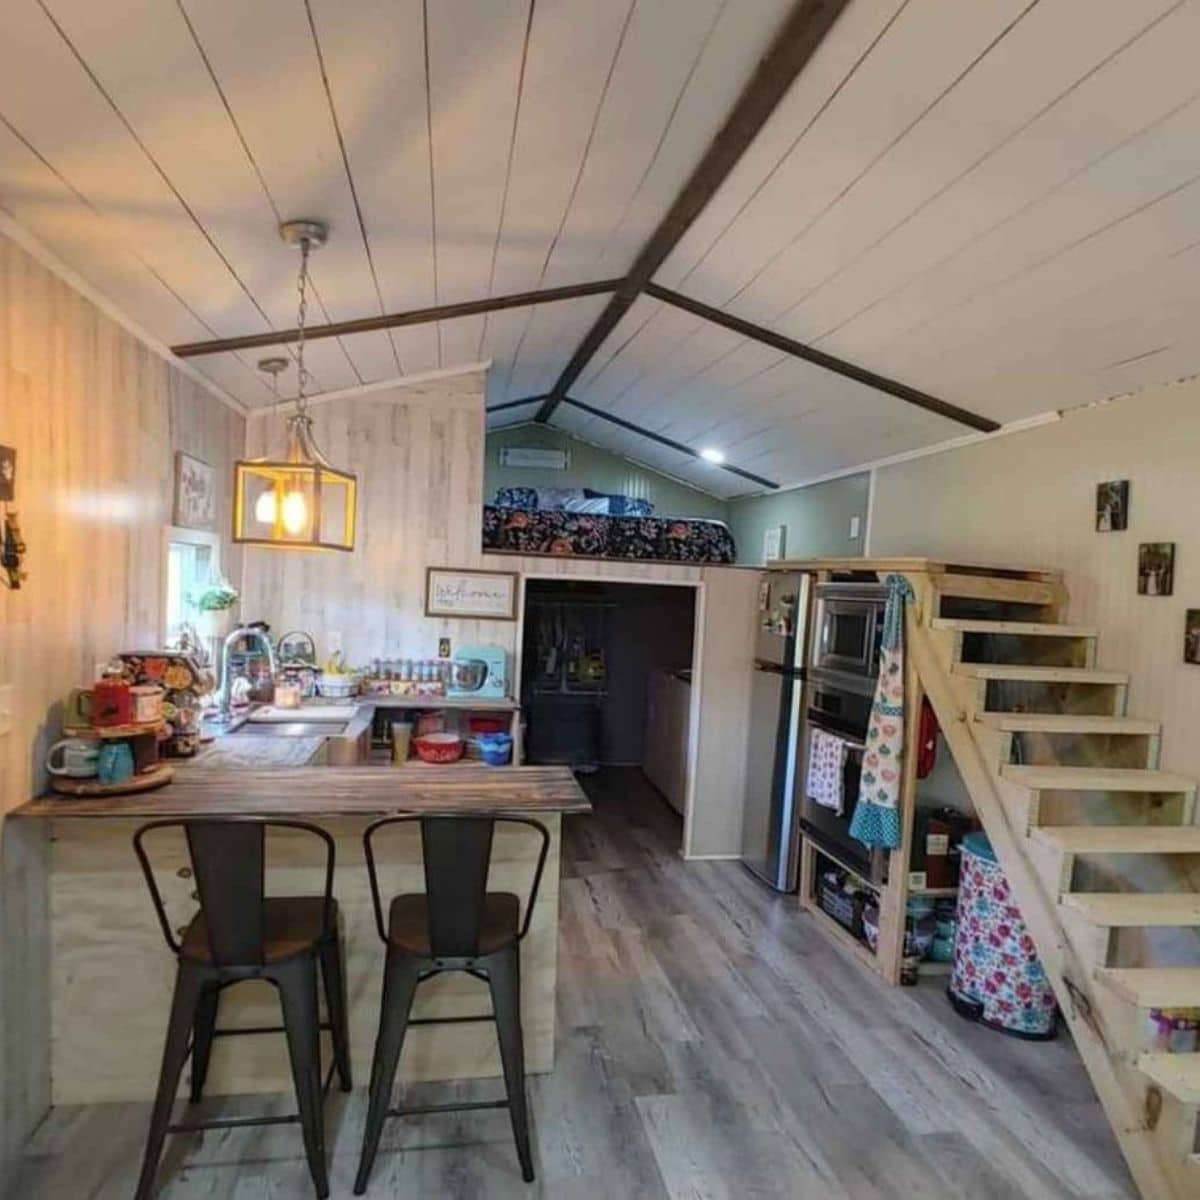 view into back of tiny home with stairs on right and kitchen counter on left